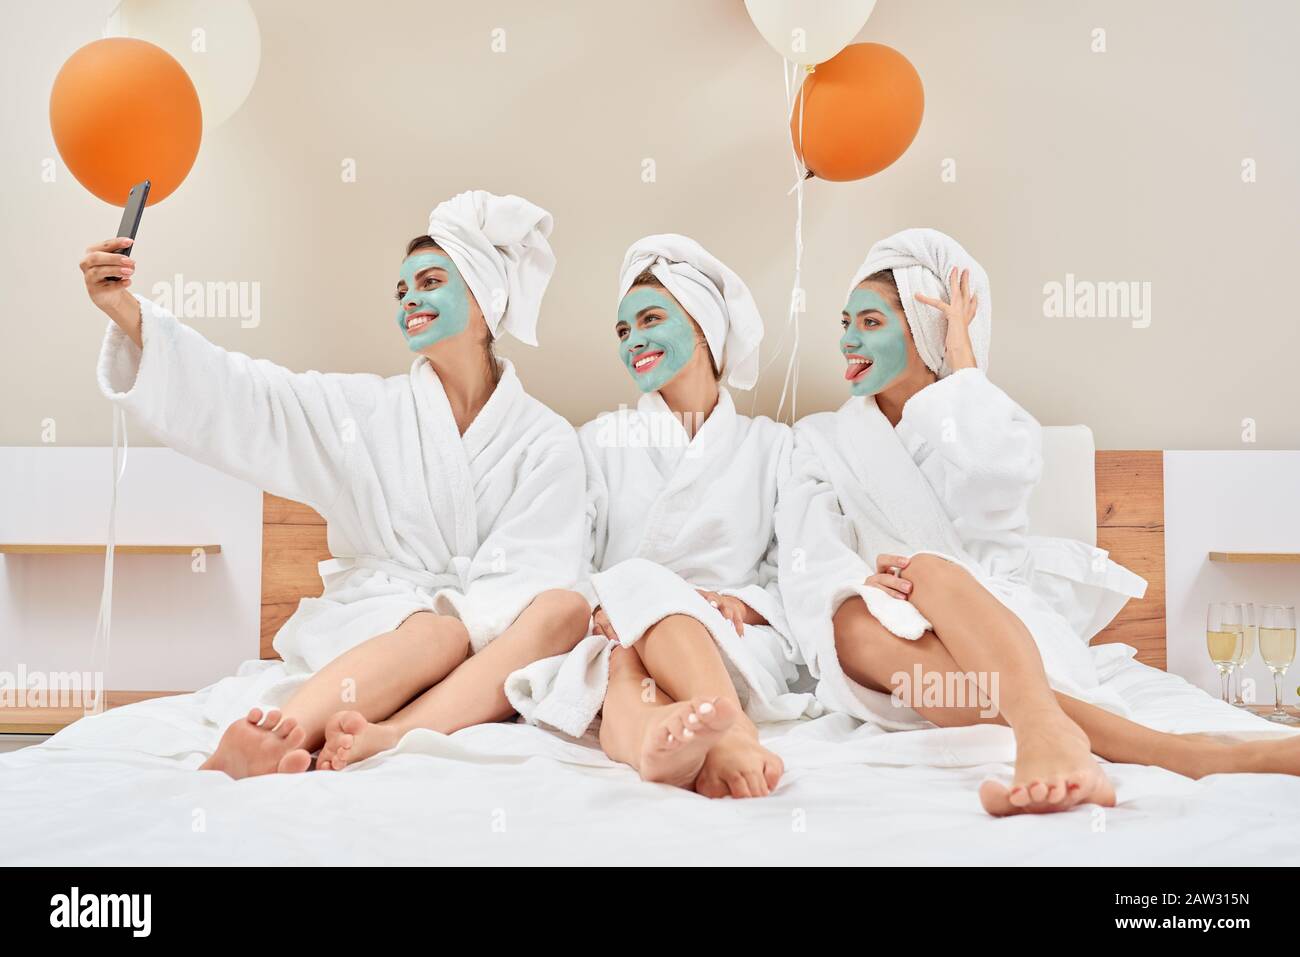 Front view of smiling group of girls with cosmetic masks, in towels on heads and bathrobes having fun at home. Three pretty female friends taking selfie in bedroom with balloons, champagne nearby. Stock Photo